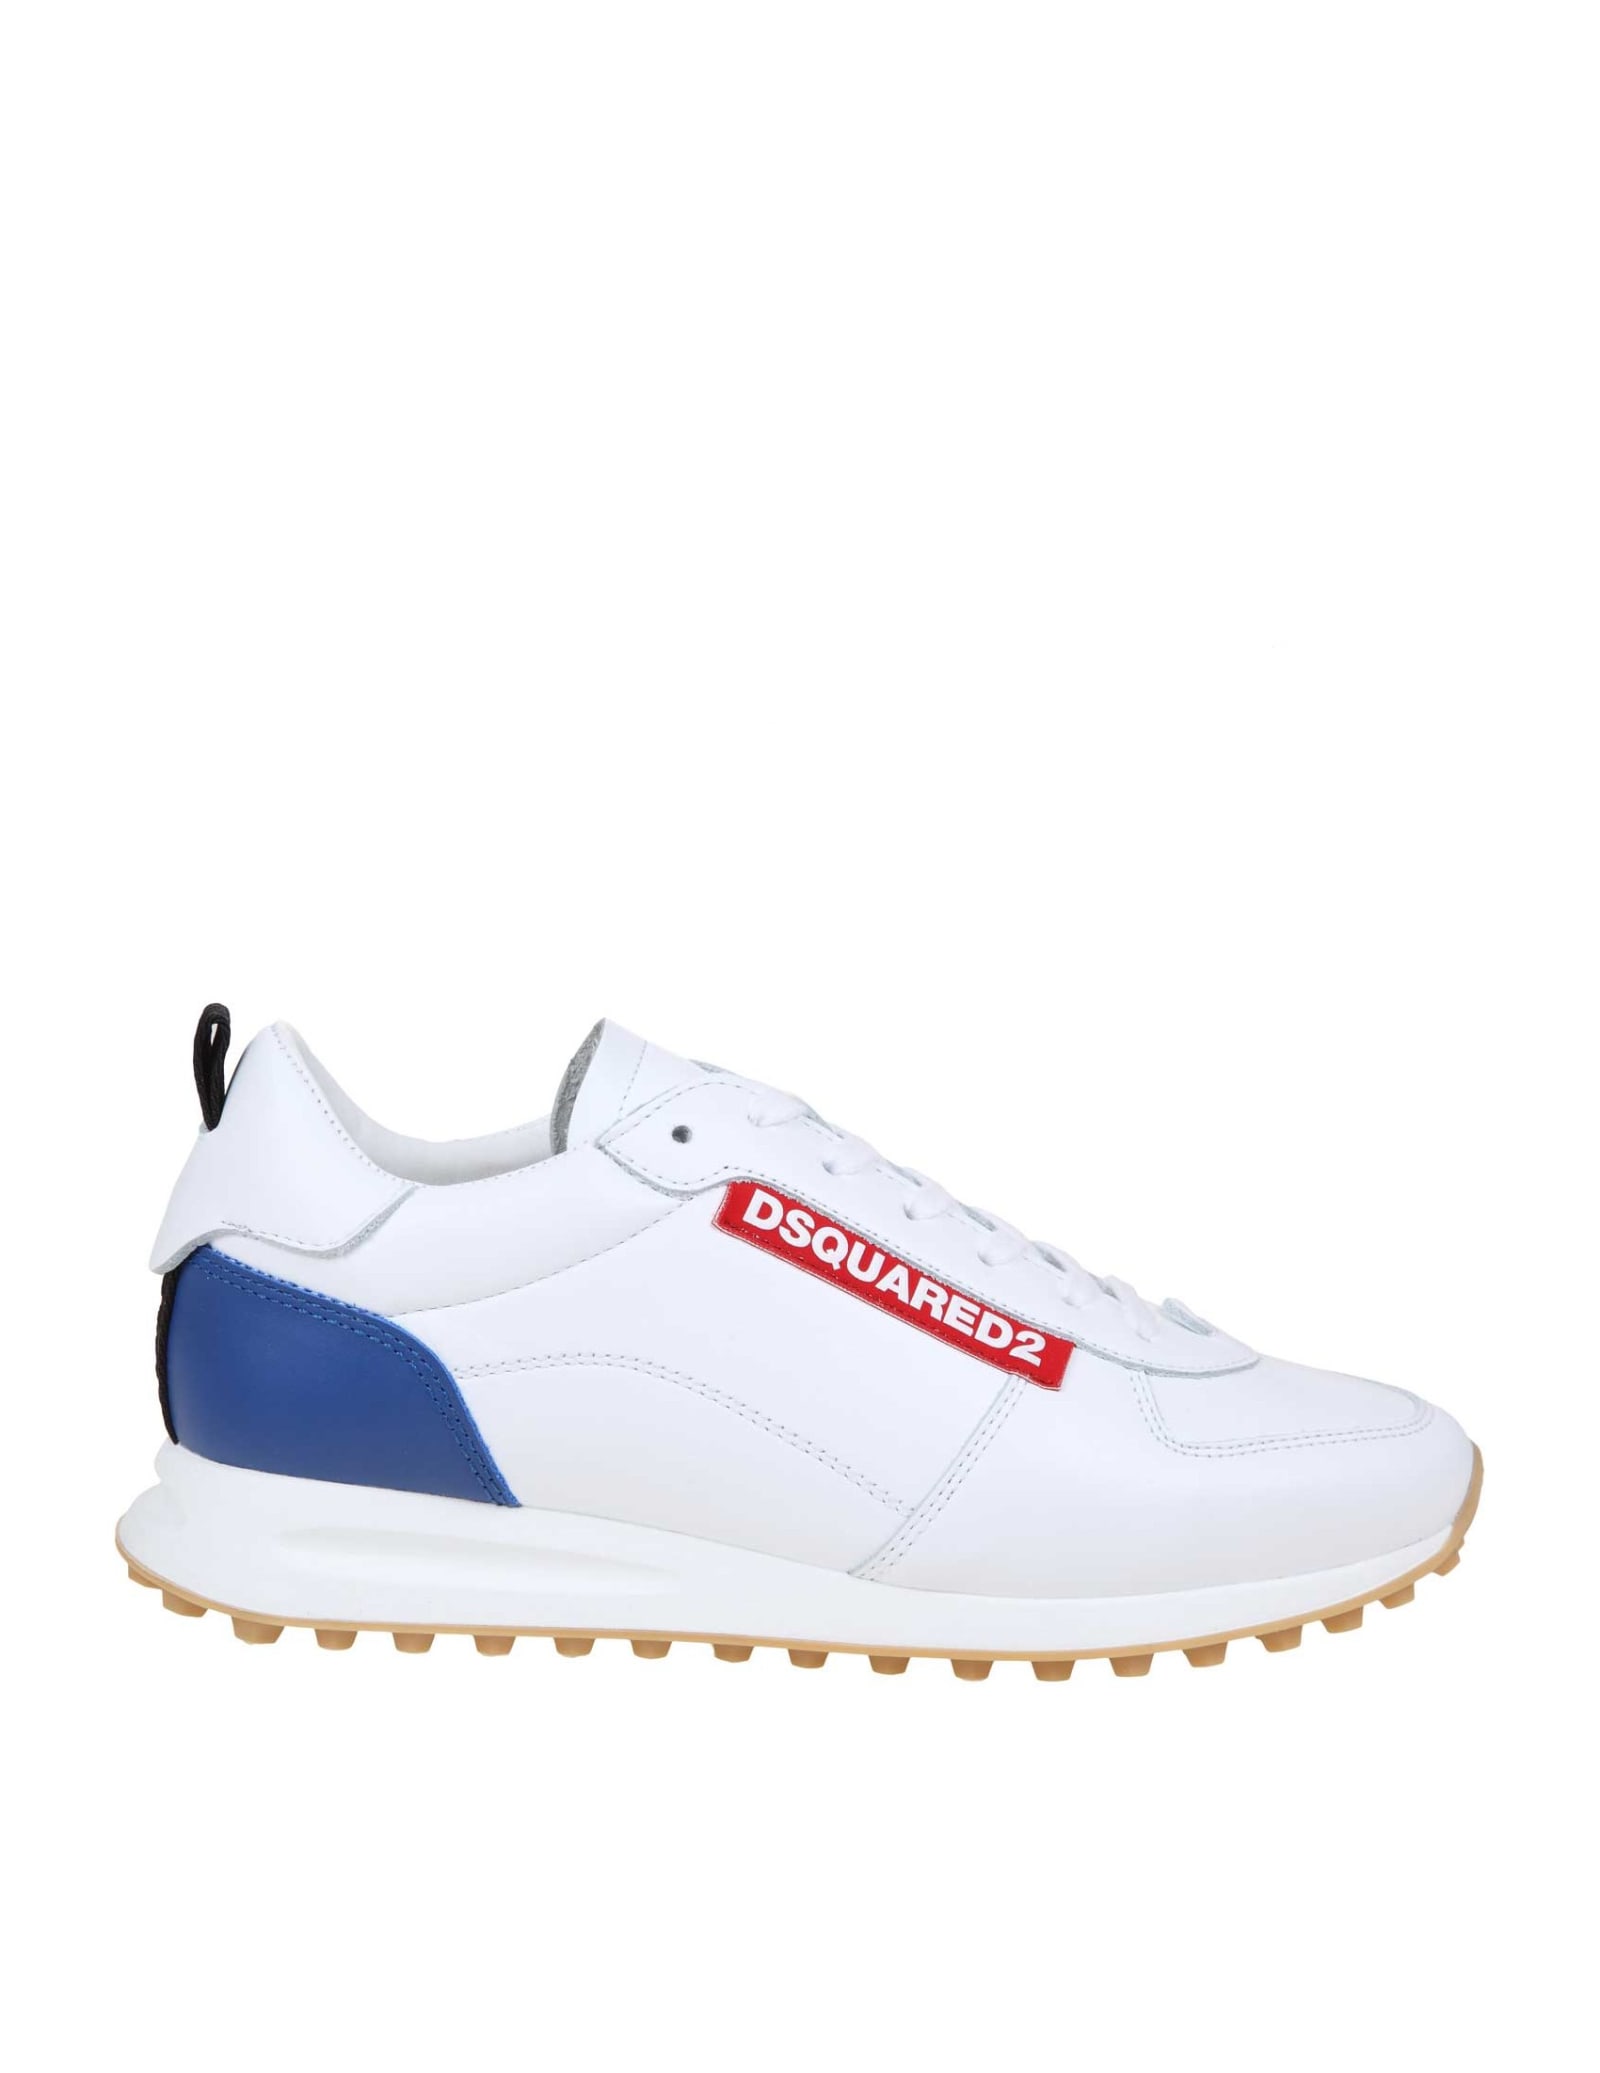 dsquared leather sneakers